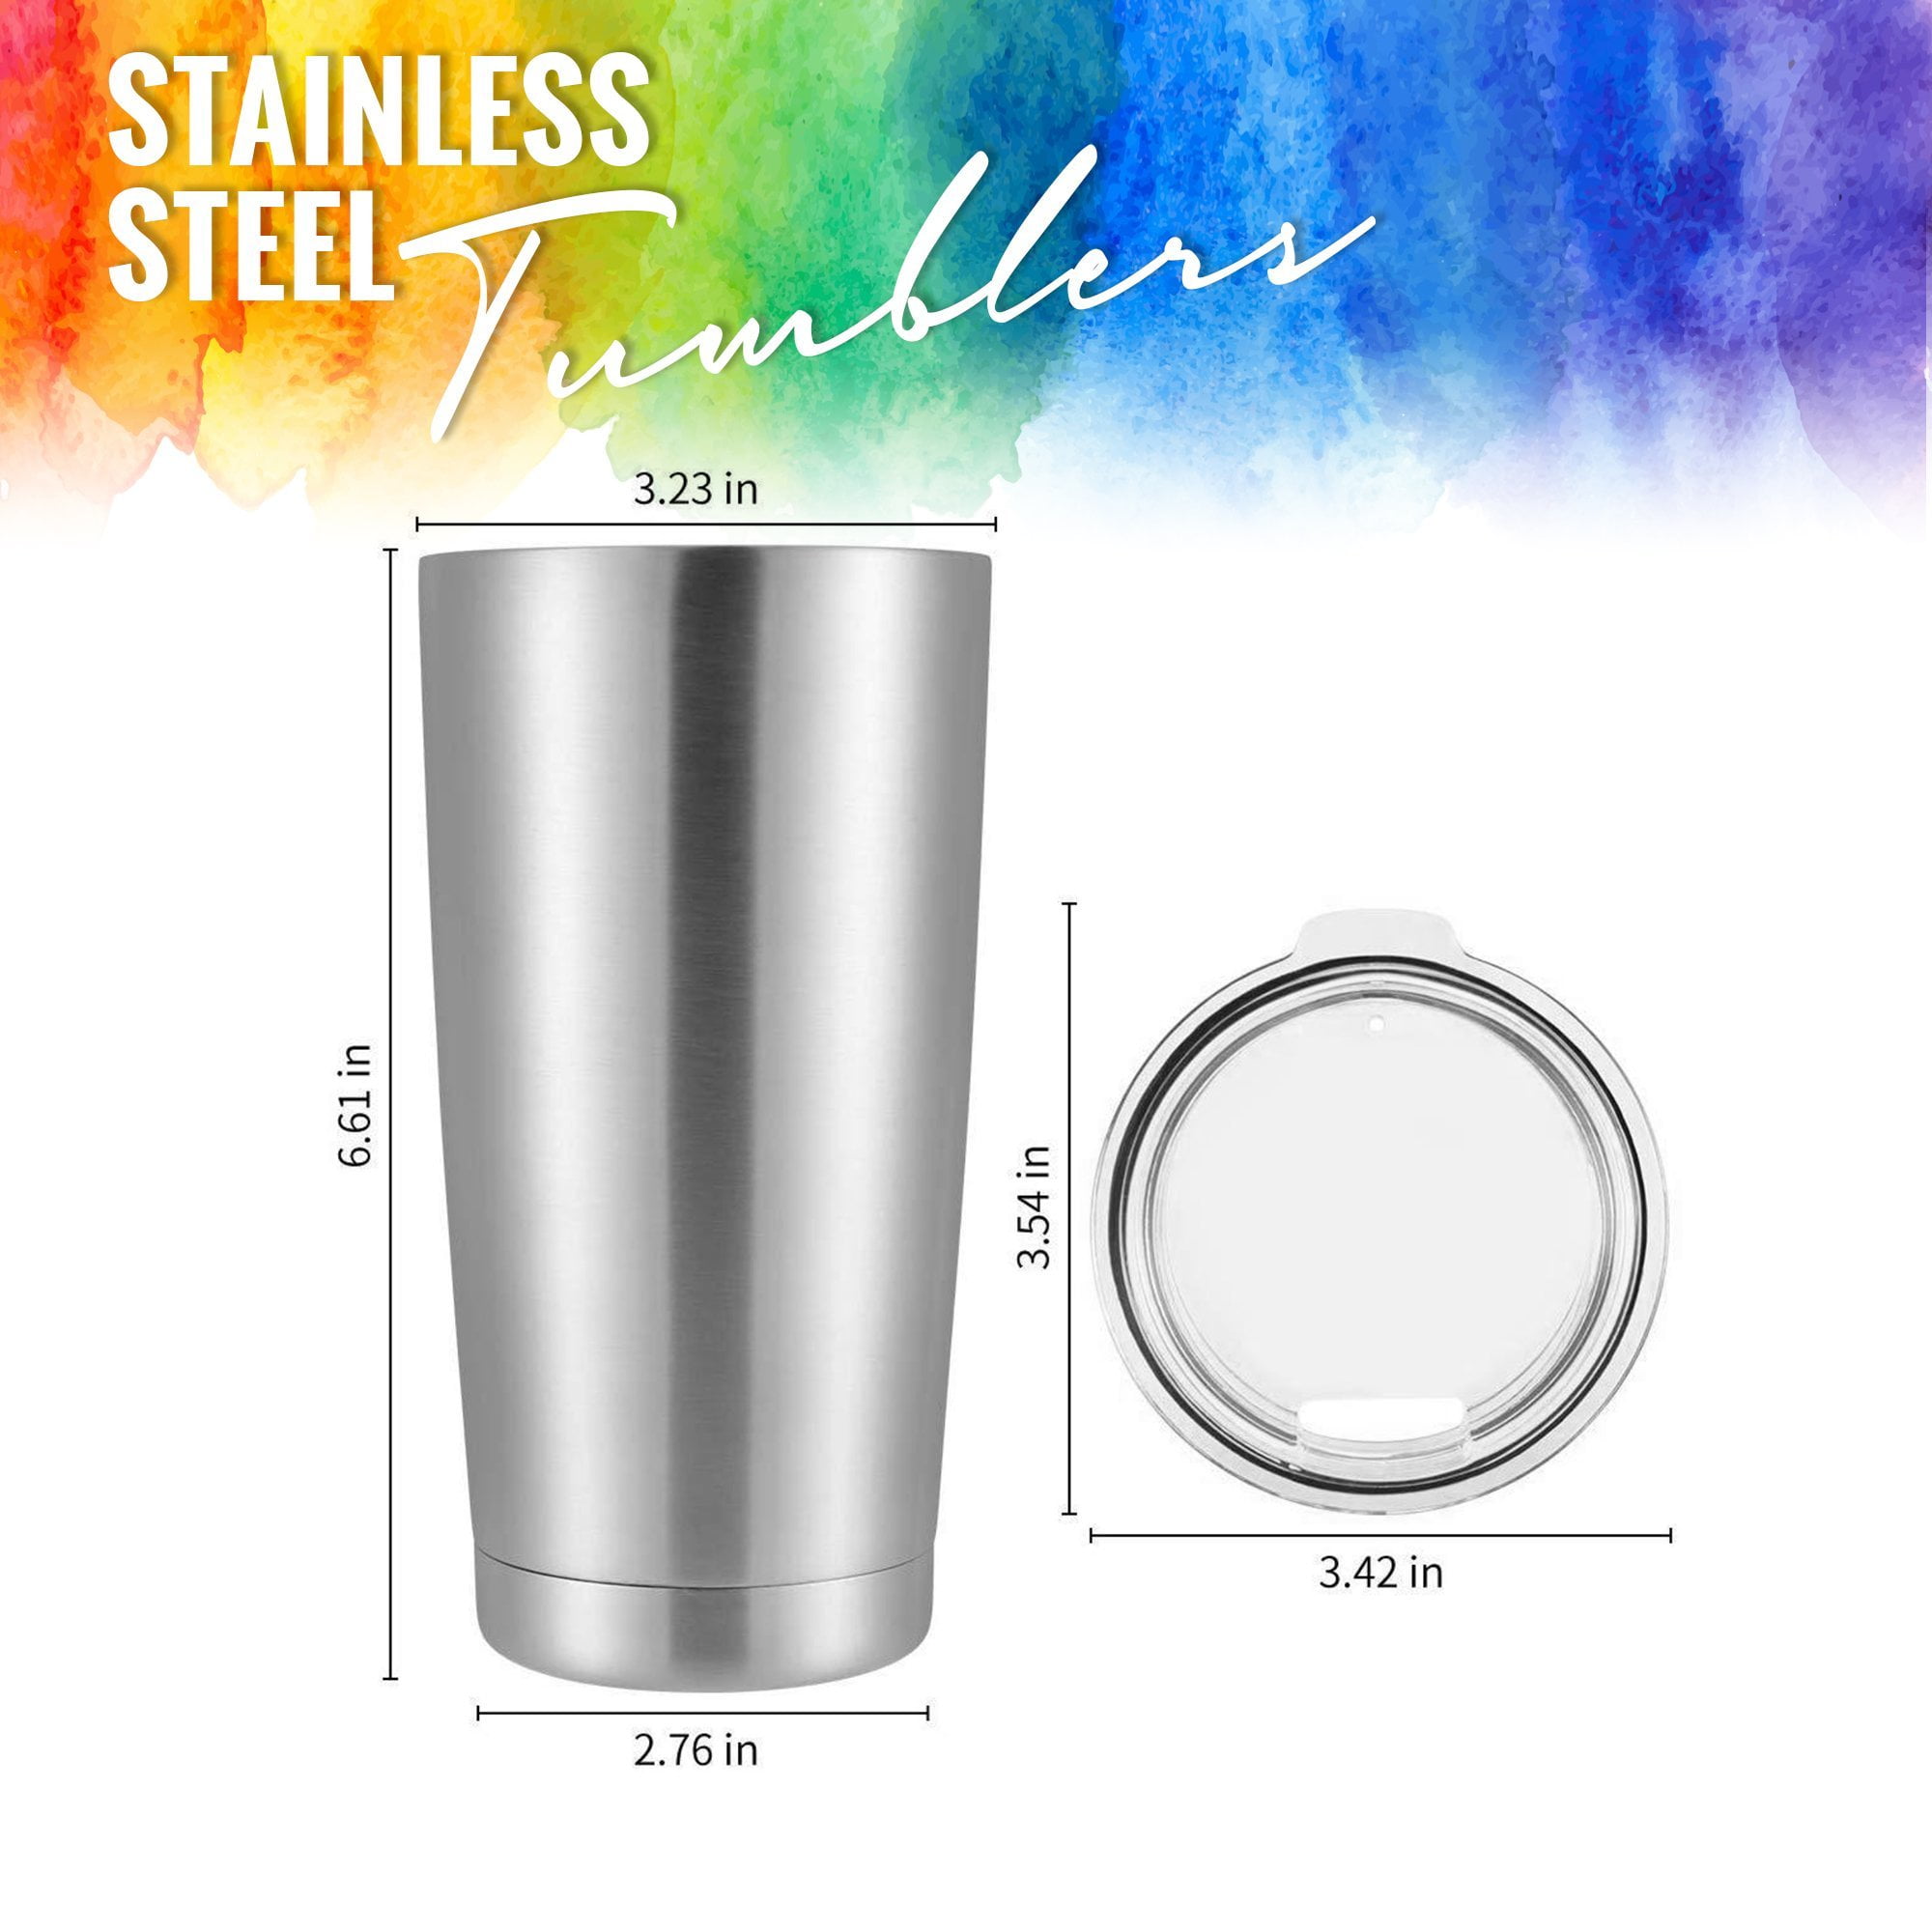 8 Pieces Stainless Steel Whiskey Glass Whiskey Glass Bulk 6.8 oz Insulated  Metal Cups Double Wall Tu…See more 8 Pieces Stainless Steel Whiskey Glass